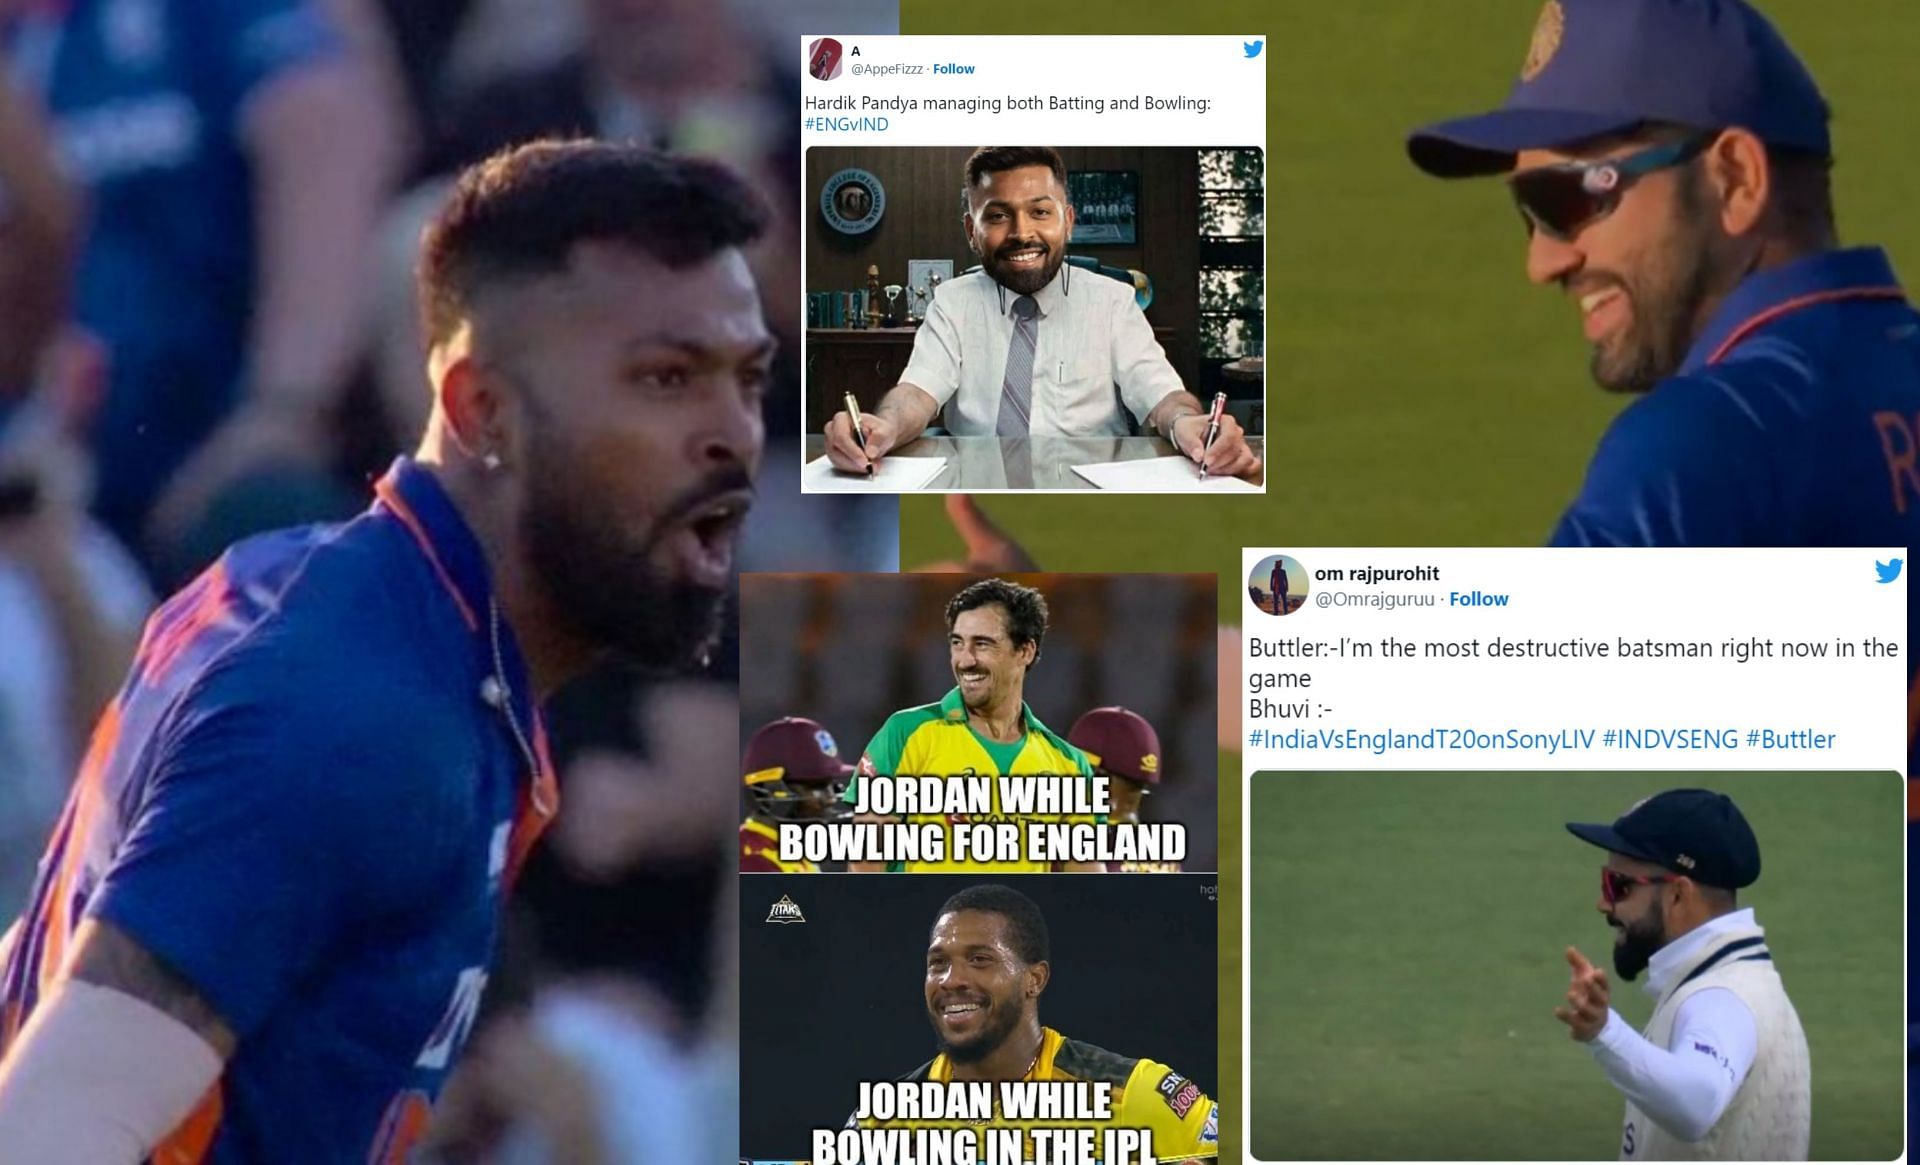 Fans reacted with humorous memes as the Men in Blue secured a win